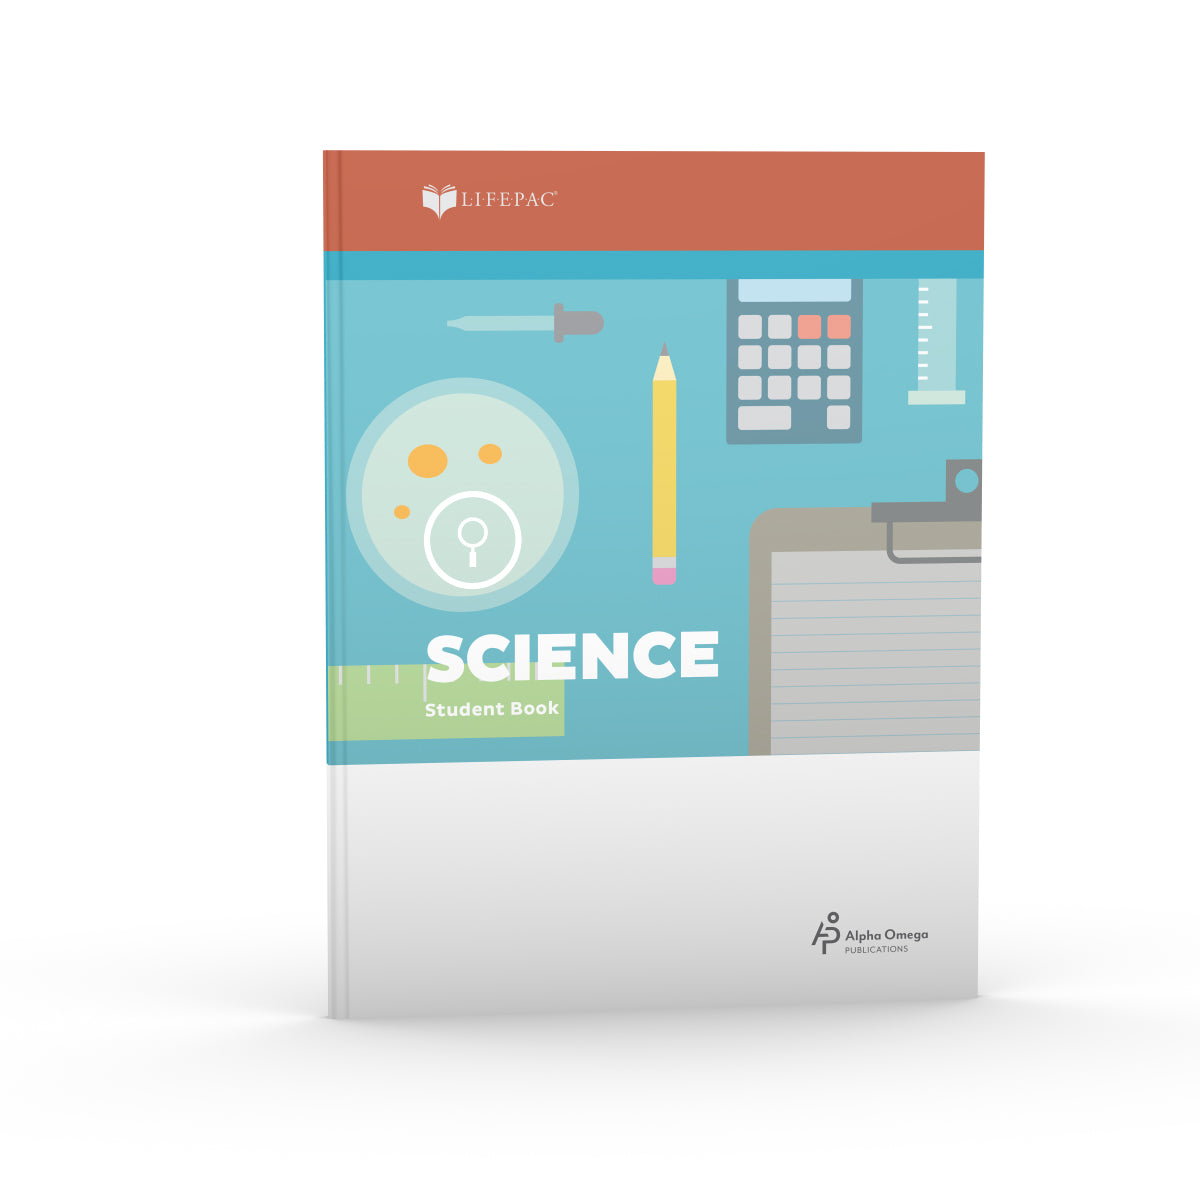 Lifepac Science Unit 1 Student Book SCI0301 – AOP Christian Homeschooling